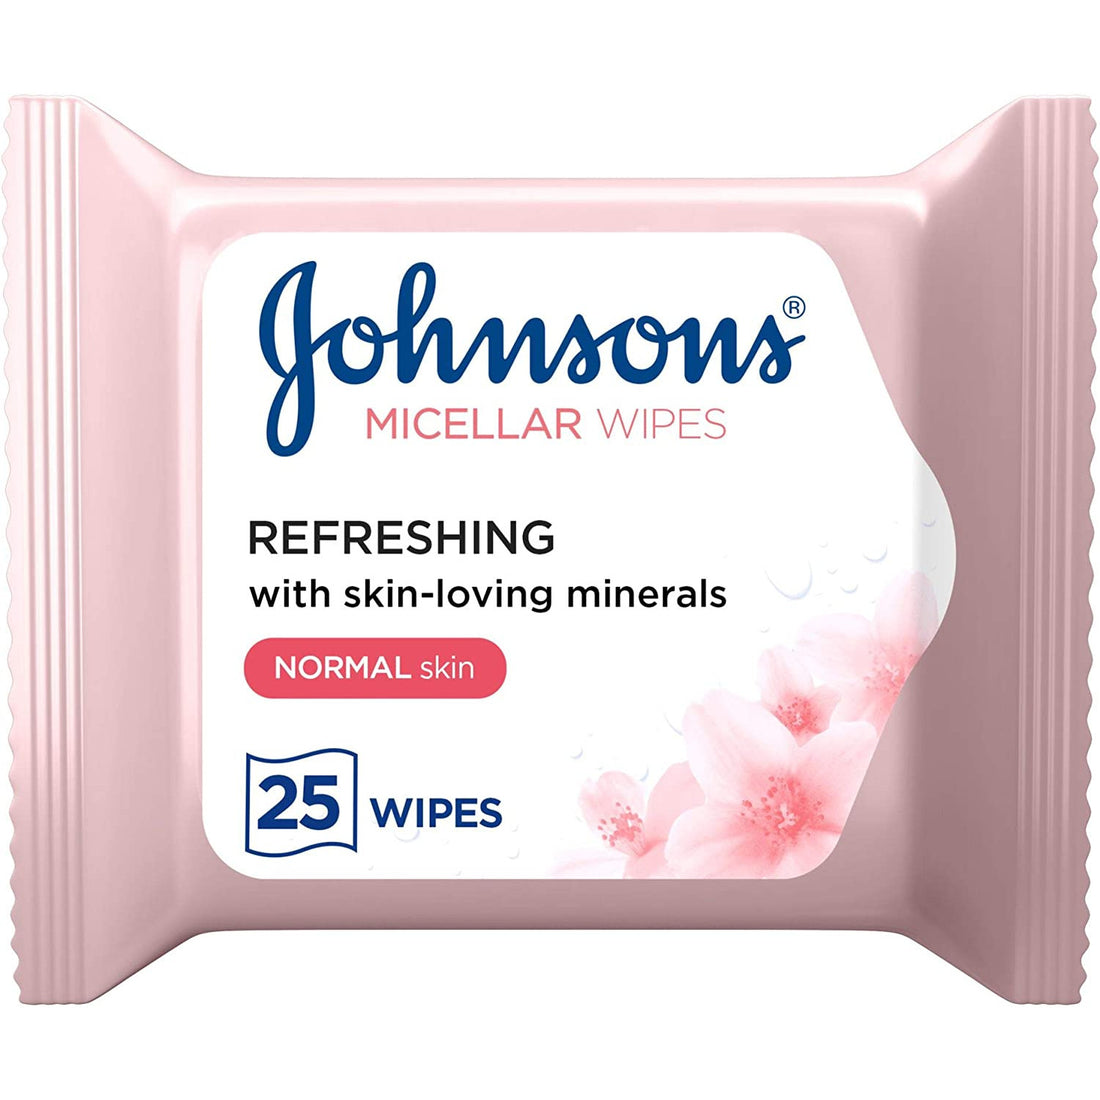 JOHNSON’S Cleansing Facial Micellar Wipes, Refreshing, Normal Skin, Pack of 25 wipes